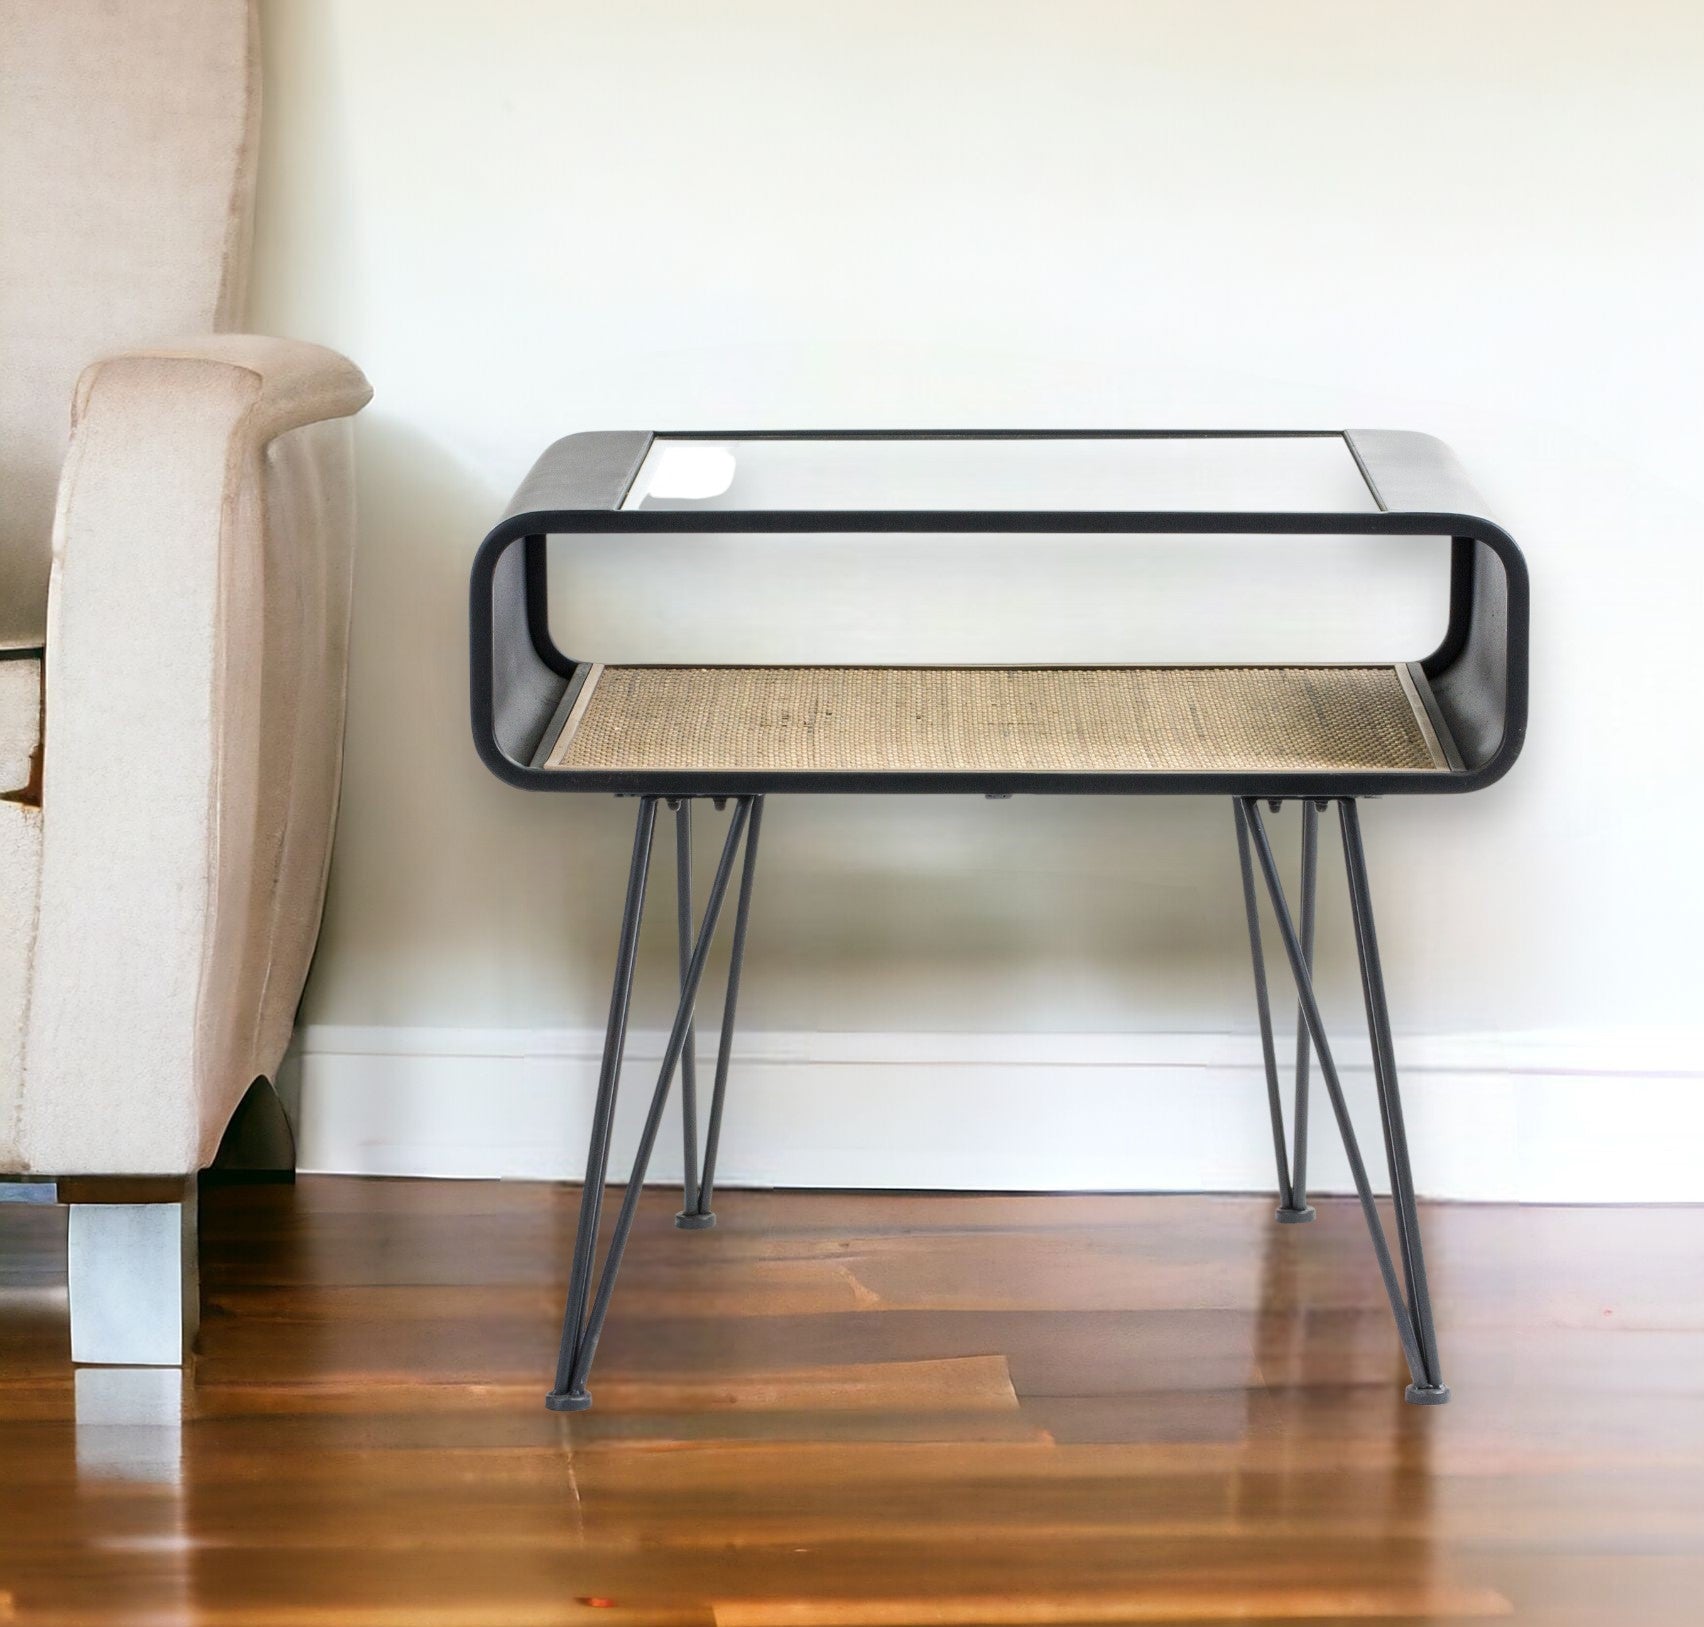 24" Black Glass End Table With Shelf